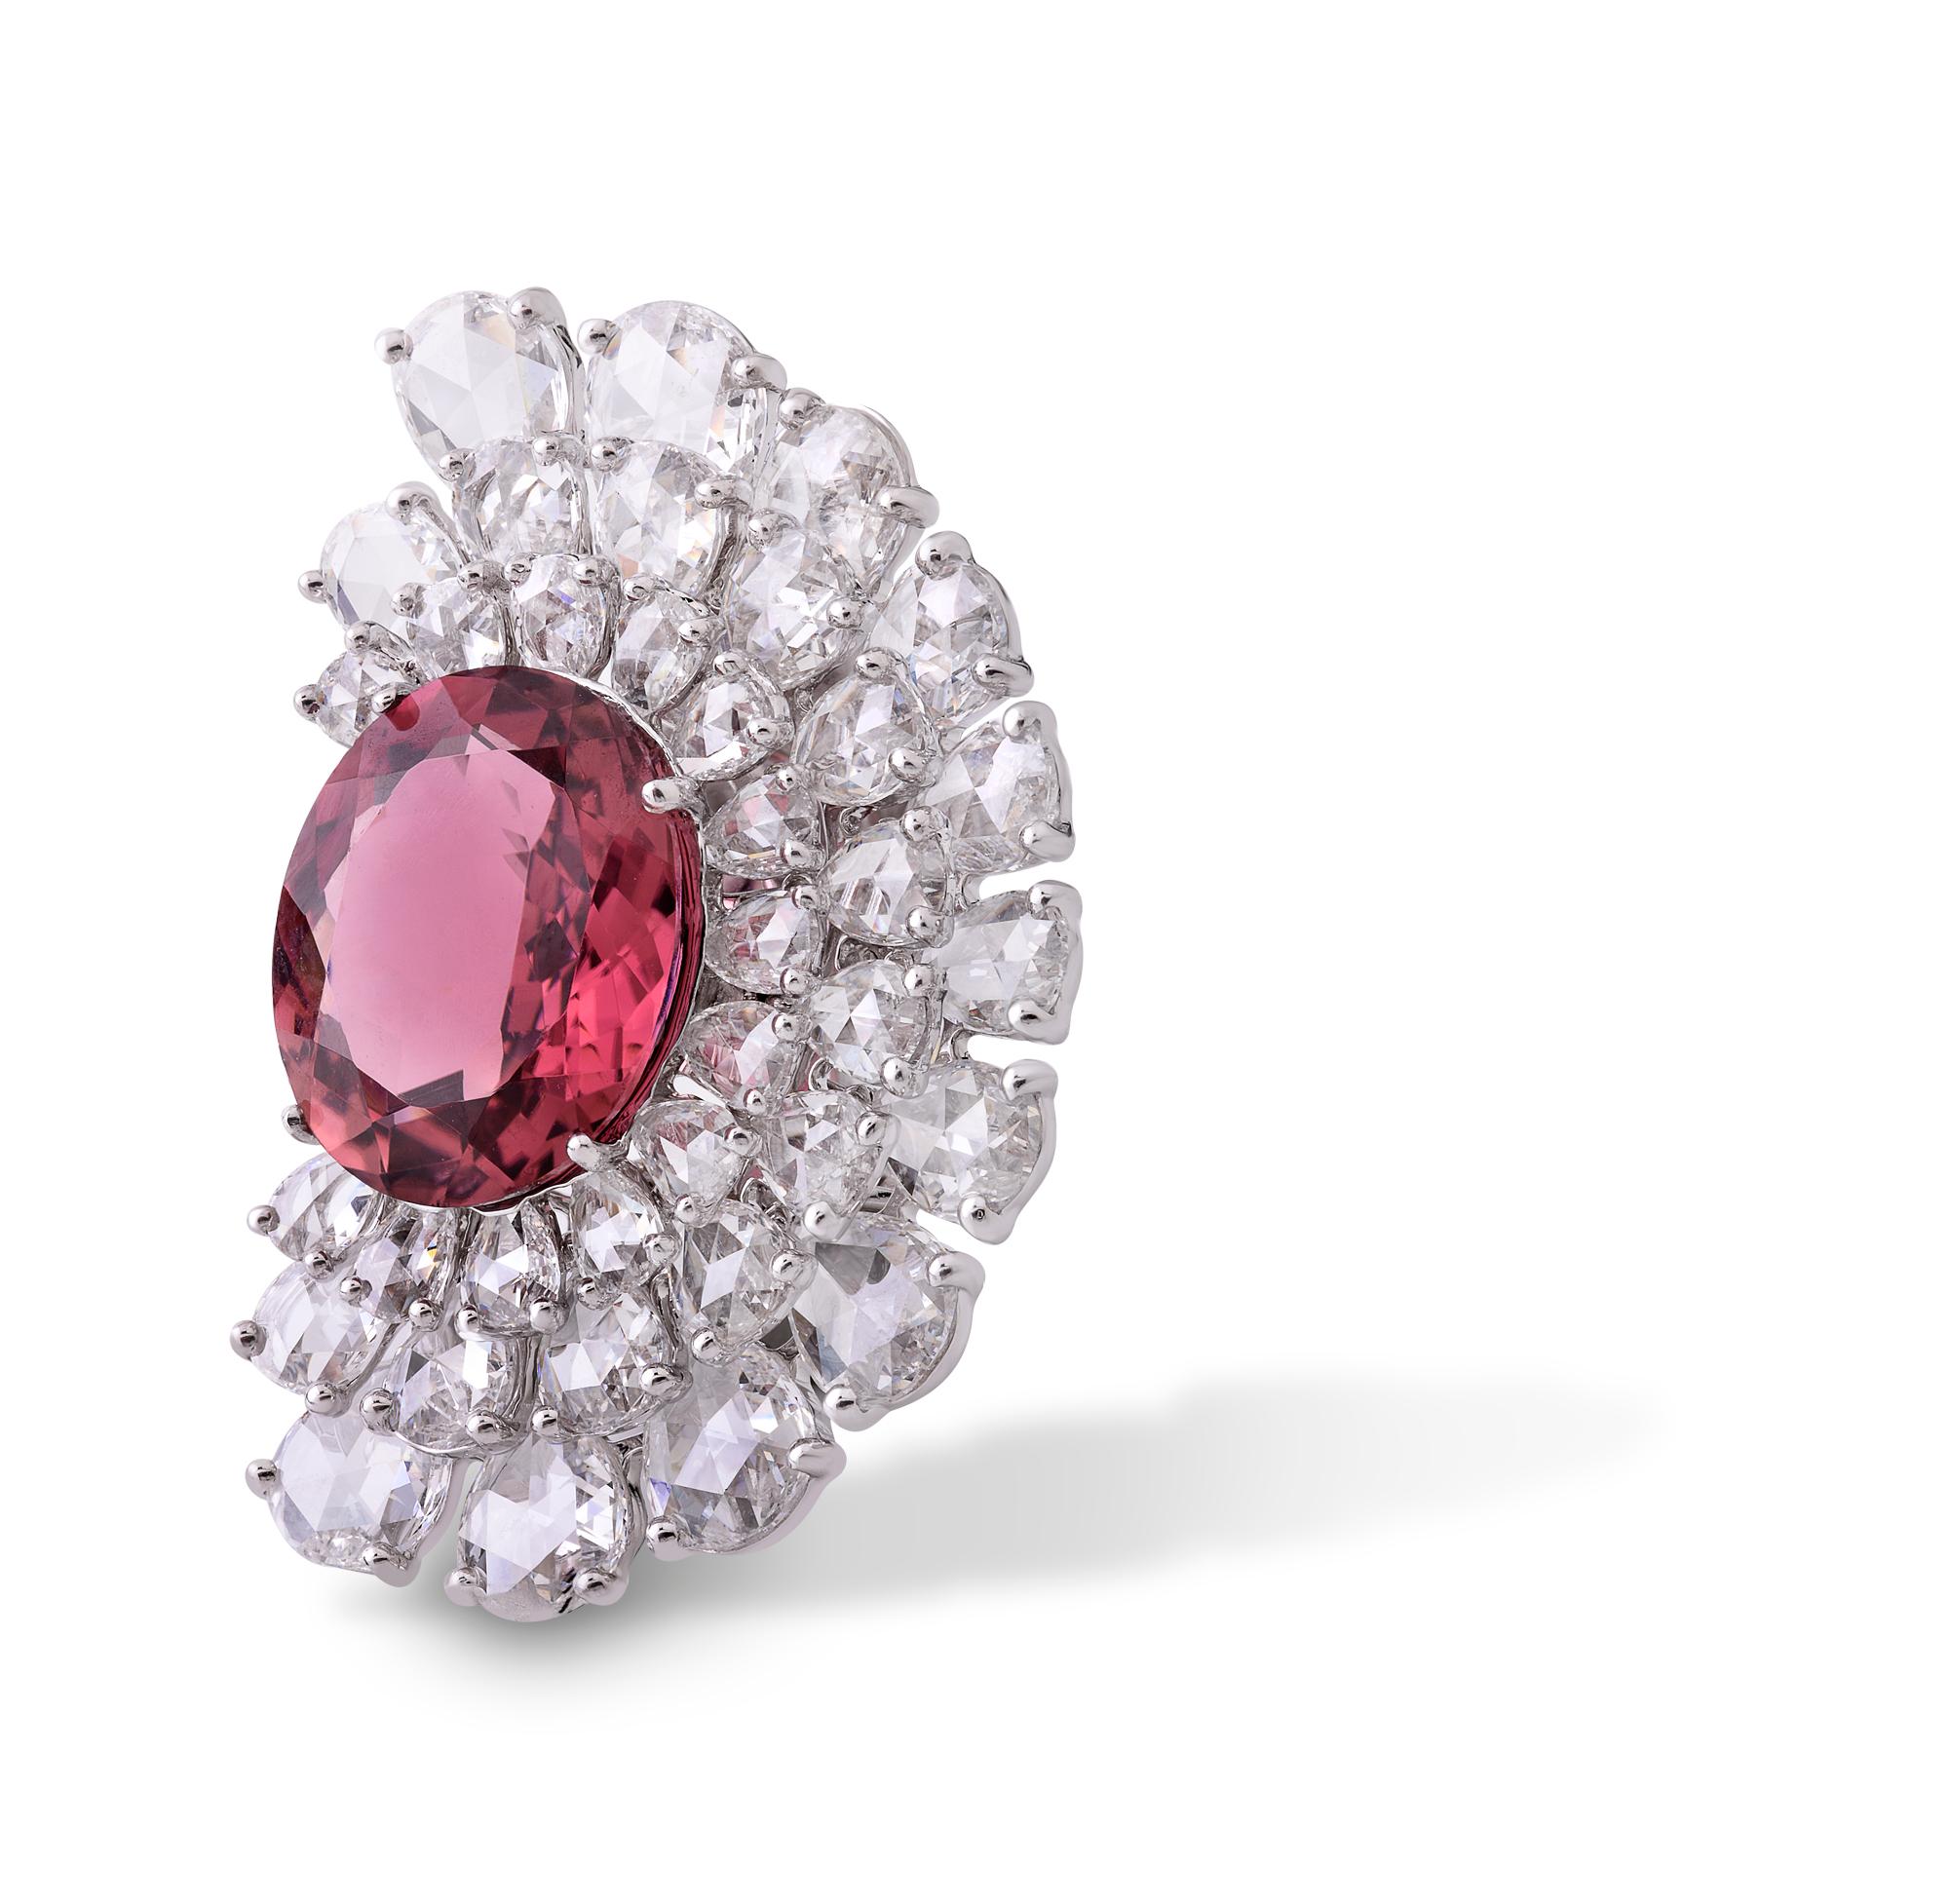 These bold, fan-shaped earrings, set with 5.78cts of fancy shape rose cut diamonds surrounding a pair of striking hand-cut rubellite stones, evoke an aura of mystery. 

- Butterfly fastening for pierced ears
- This piece is handmade and as such may